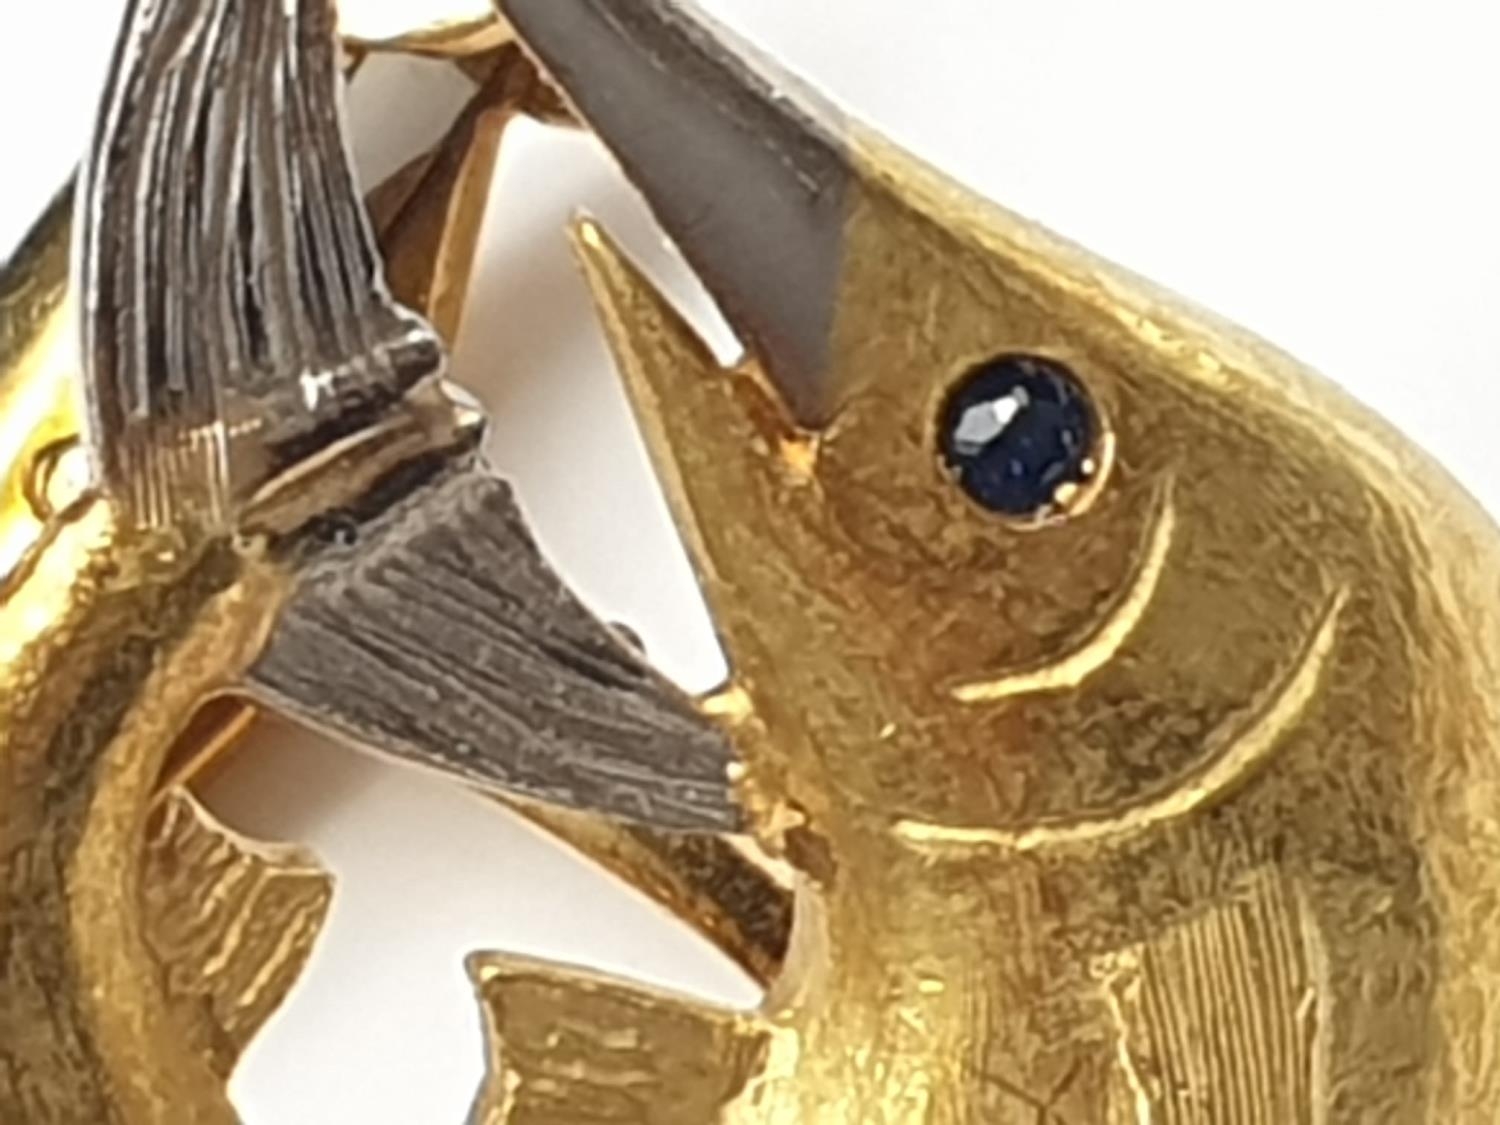 Exquisite Pair of Hand-Made 18K White and Yellow Gold Sailfish Cufflinks with Sapphire Stone Eyes. - Image 3 of 5